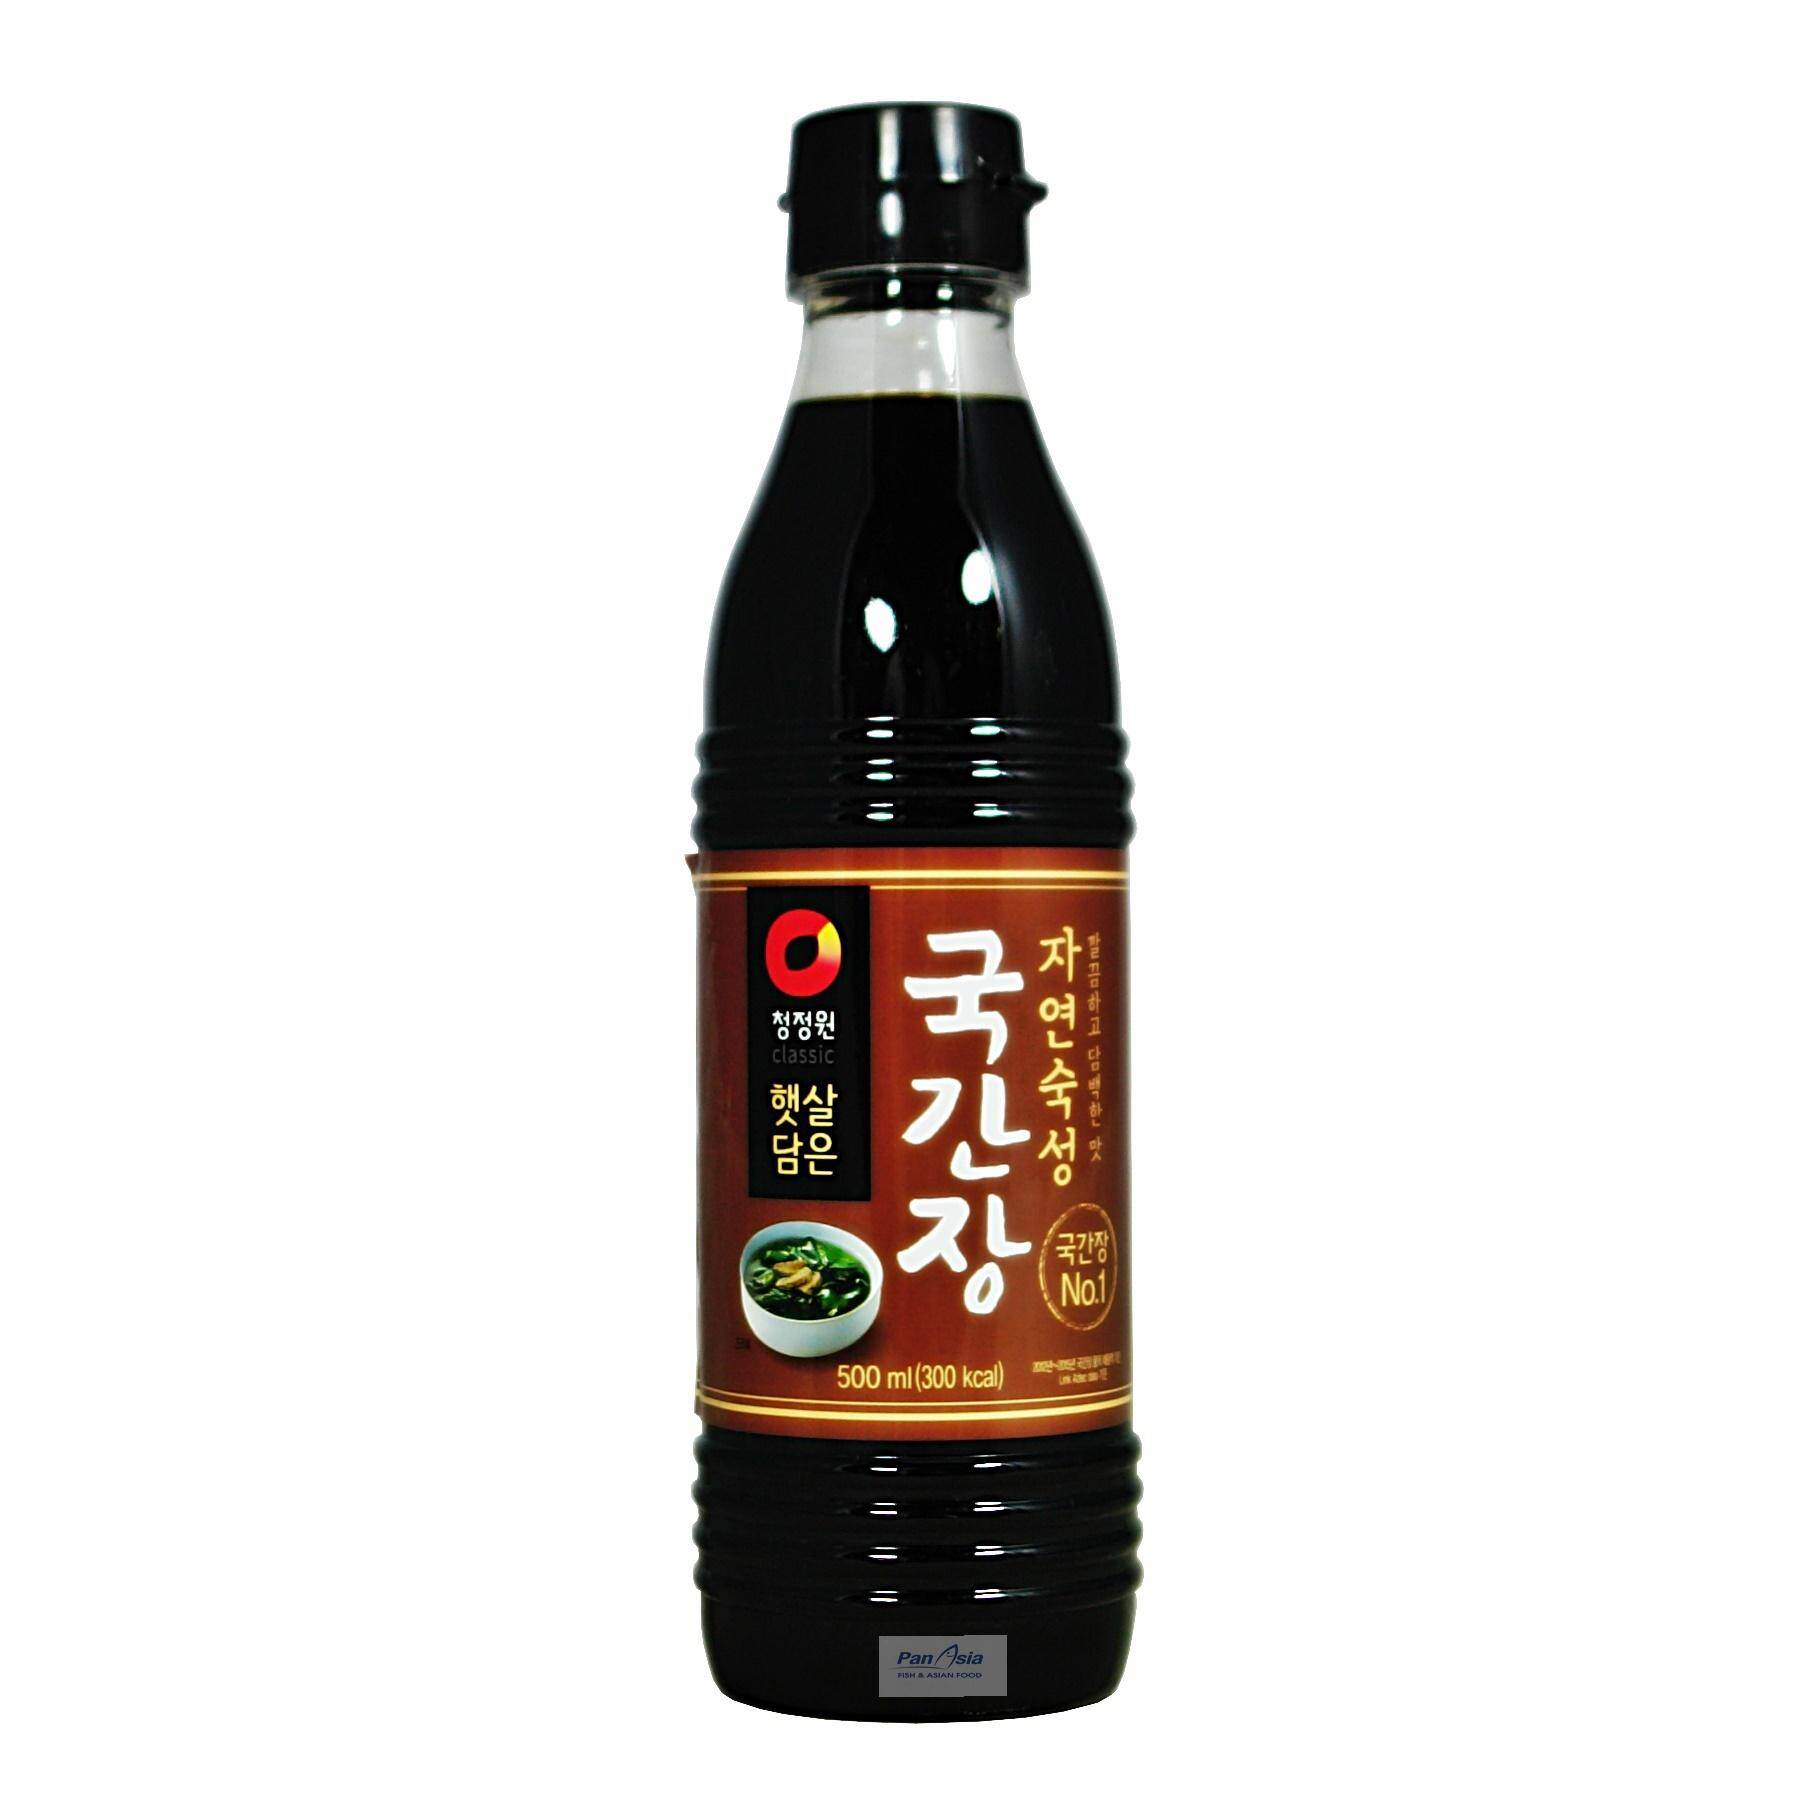 Soy sauce for Chunjungone soup 500ml 국간장